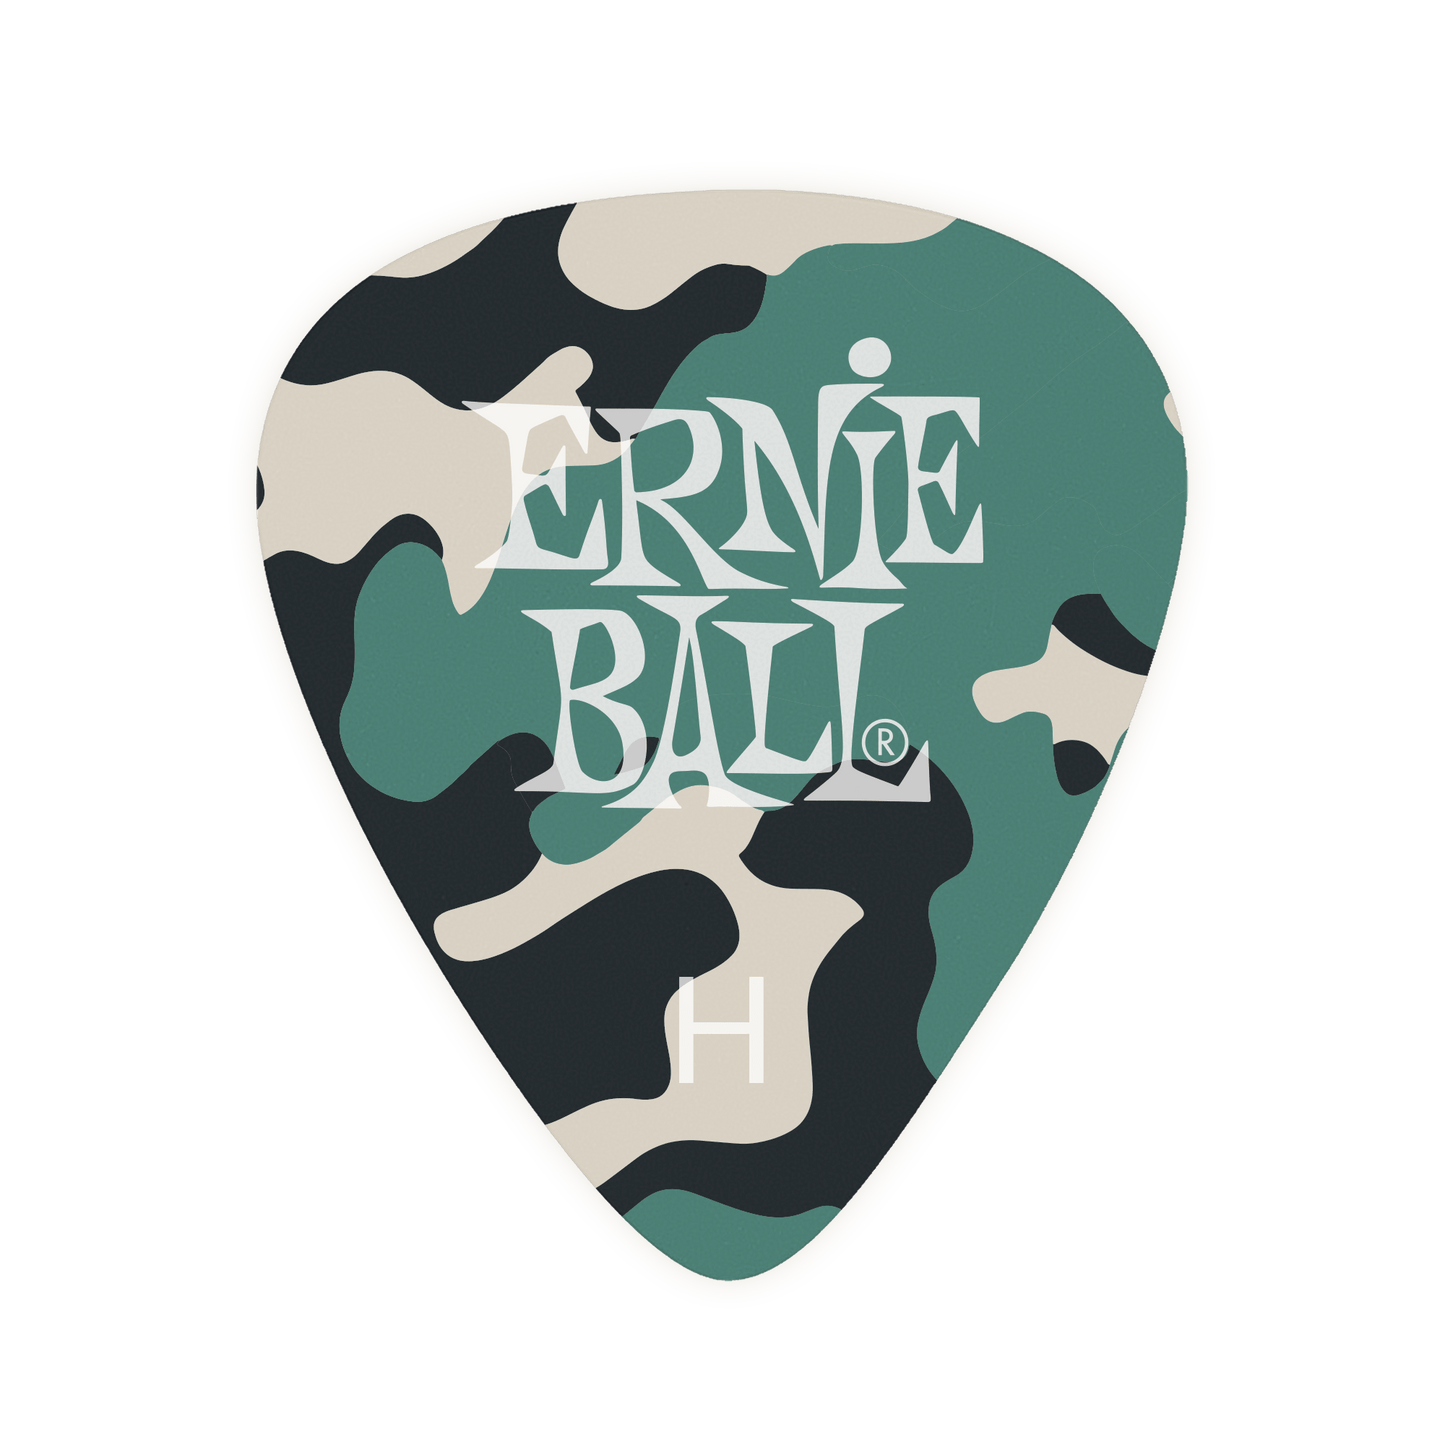 Ernie Ball Cellulose Camouflage Pena (12 adet)